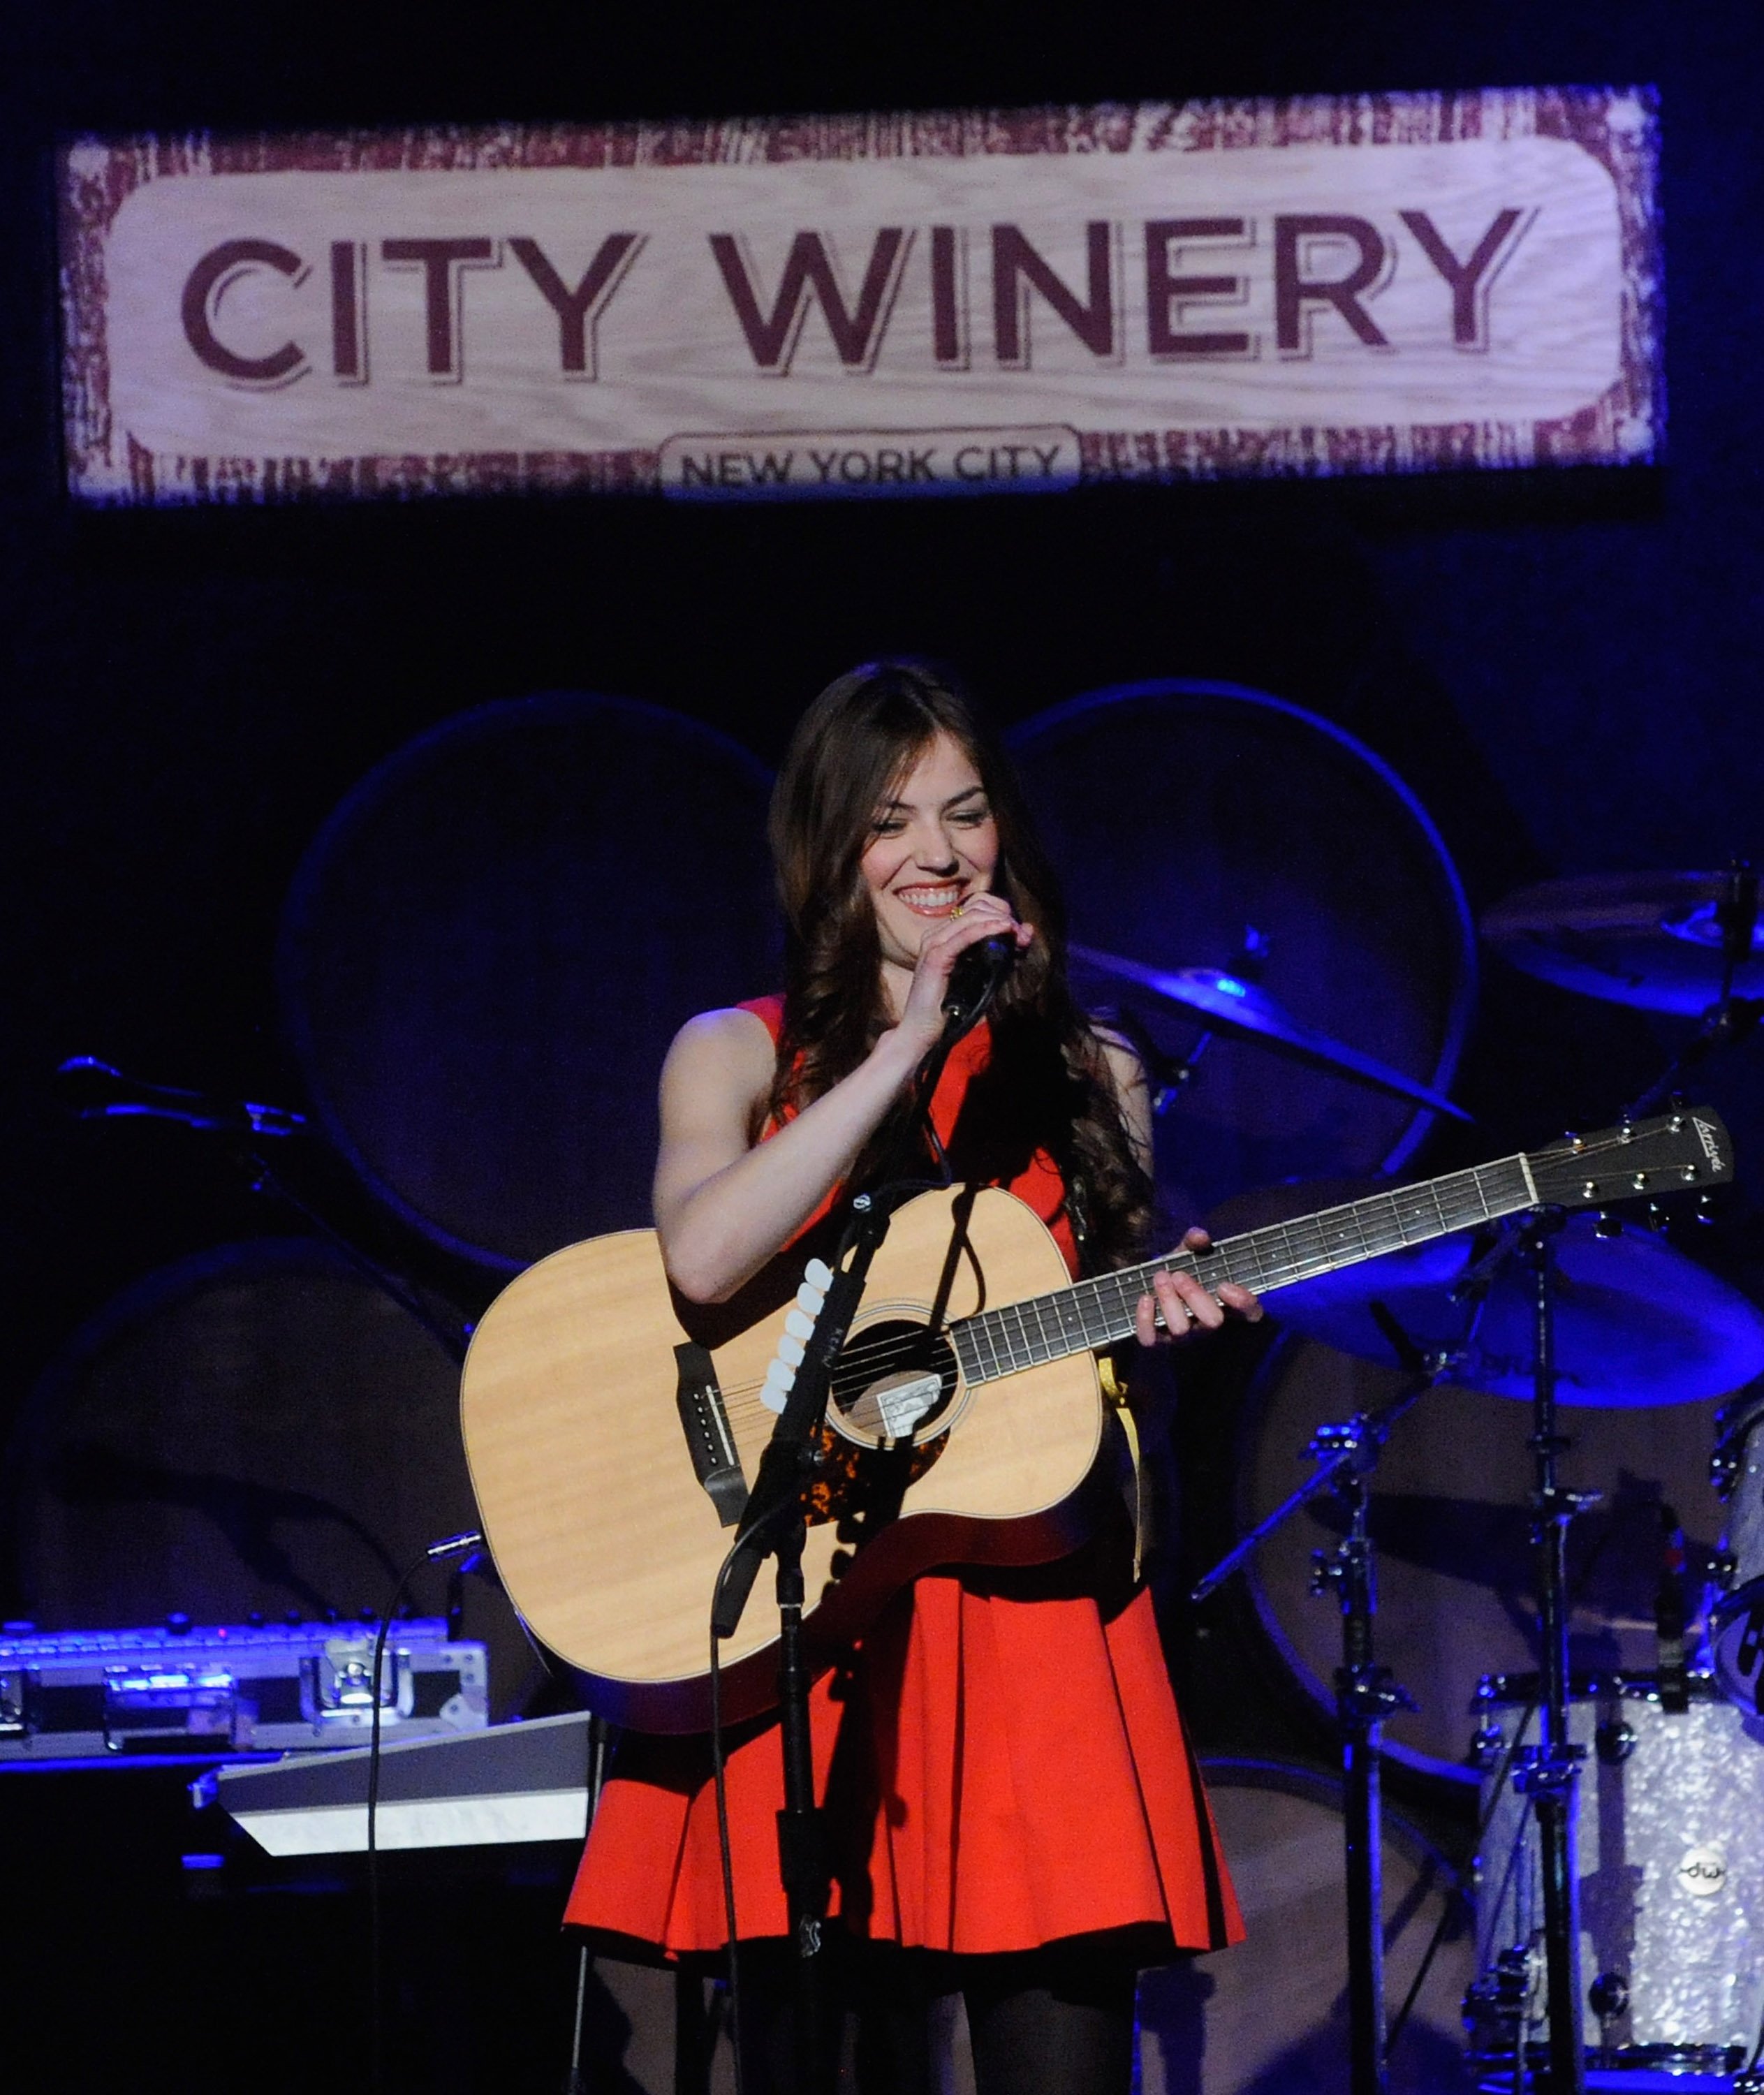  Kevin Costner's daughter, Lily Costner performs at City Winery on April 9, 2012, in New York City. | Source: Getty Images